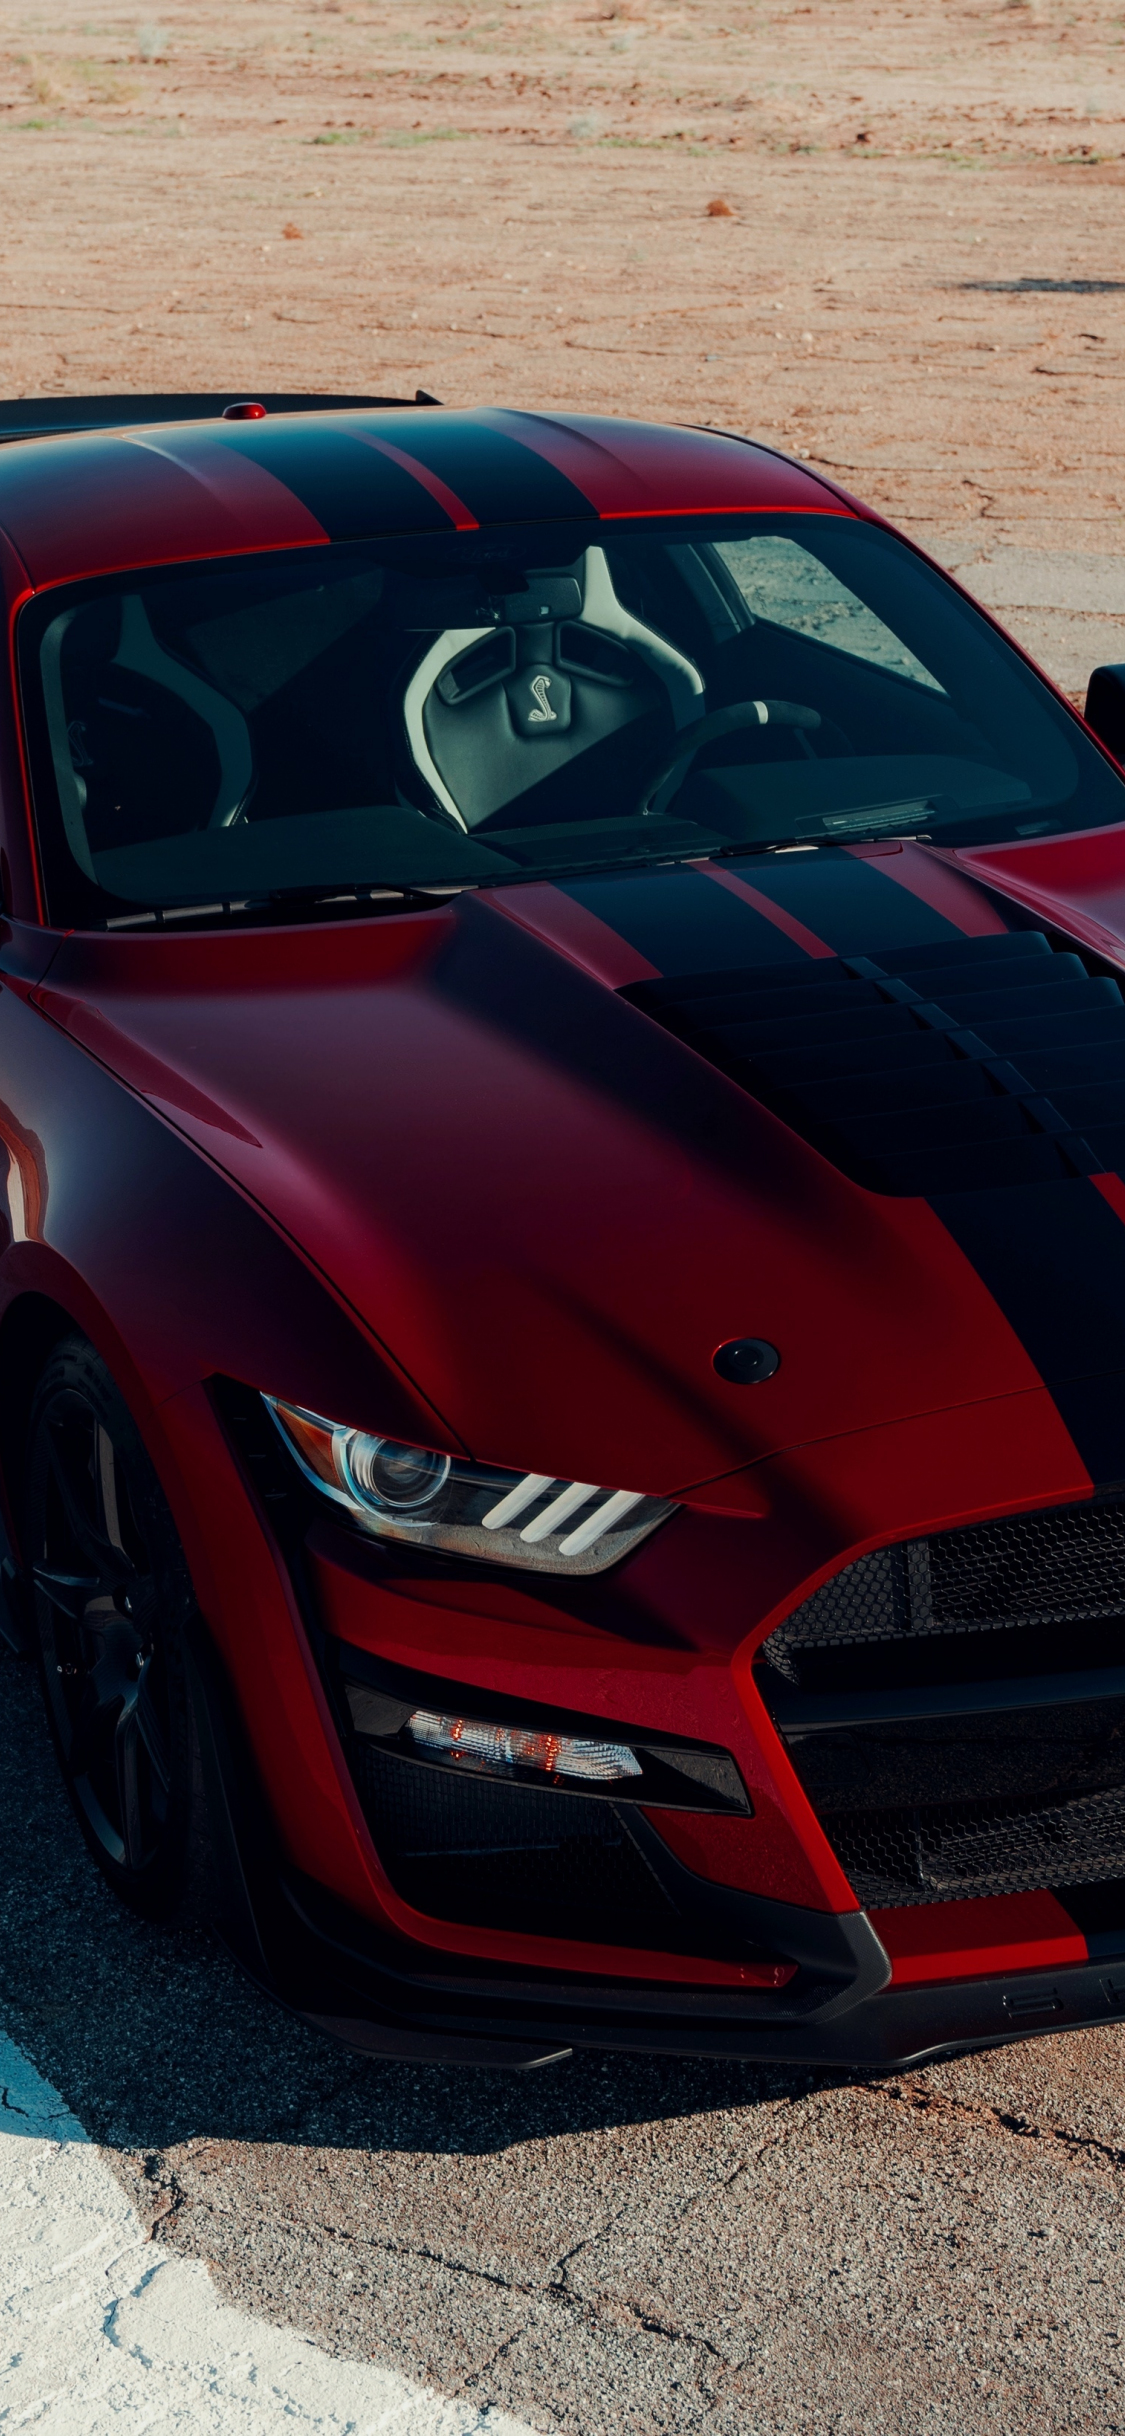 Download 1125x2436 Wallpaper Ford Mustang Shelby Gt Muscle Car, Blood Red, Iphone X 1125x2436 HD Image, Background, 25182